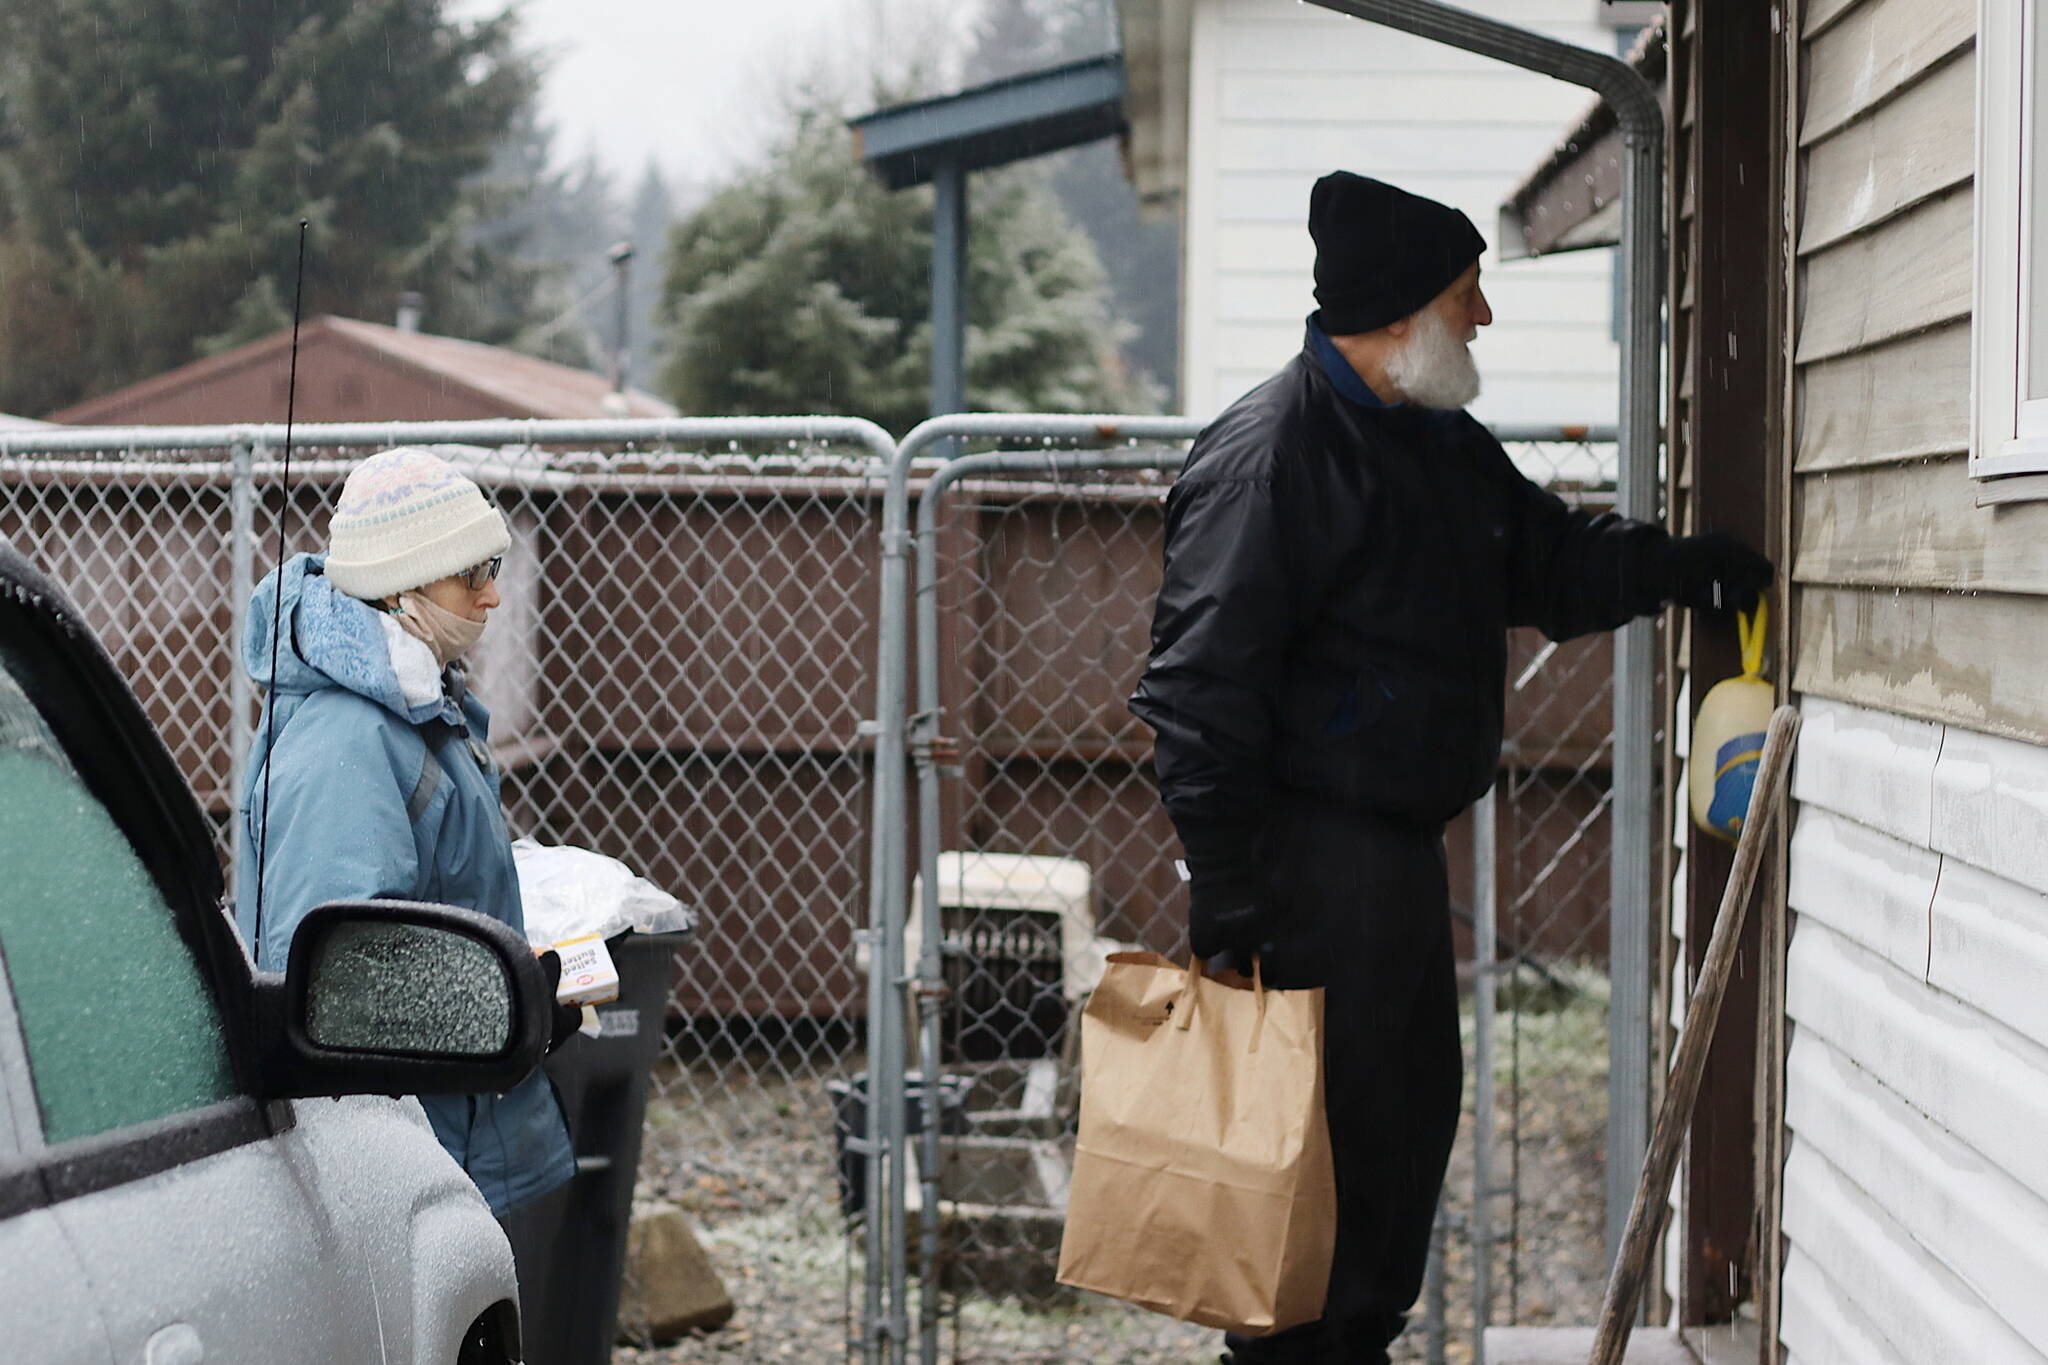 Barbara Bechtold and John Tomaro deliver a Thanksgiving meal package to a Mendenhall Valley home on Saturday. The couple, both of whom have lived in Juneau since the 1970s, have made the deliveries and taken part in other volunteer efforts for many years. The estimated 300 to 400 packages being delivered this year are a collaborative effort by St. Vincent de Paul, The Salvation Army, The Glory Hall and other local entities. (Mark Sabbatini / Juneau Empire).